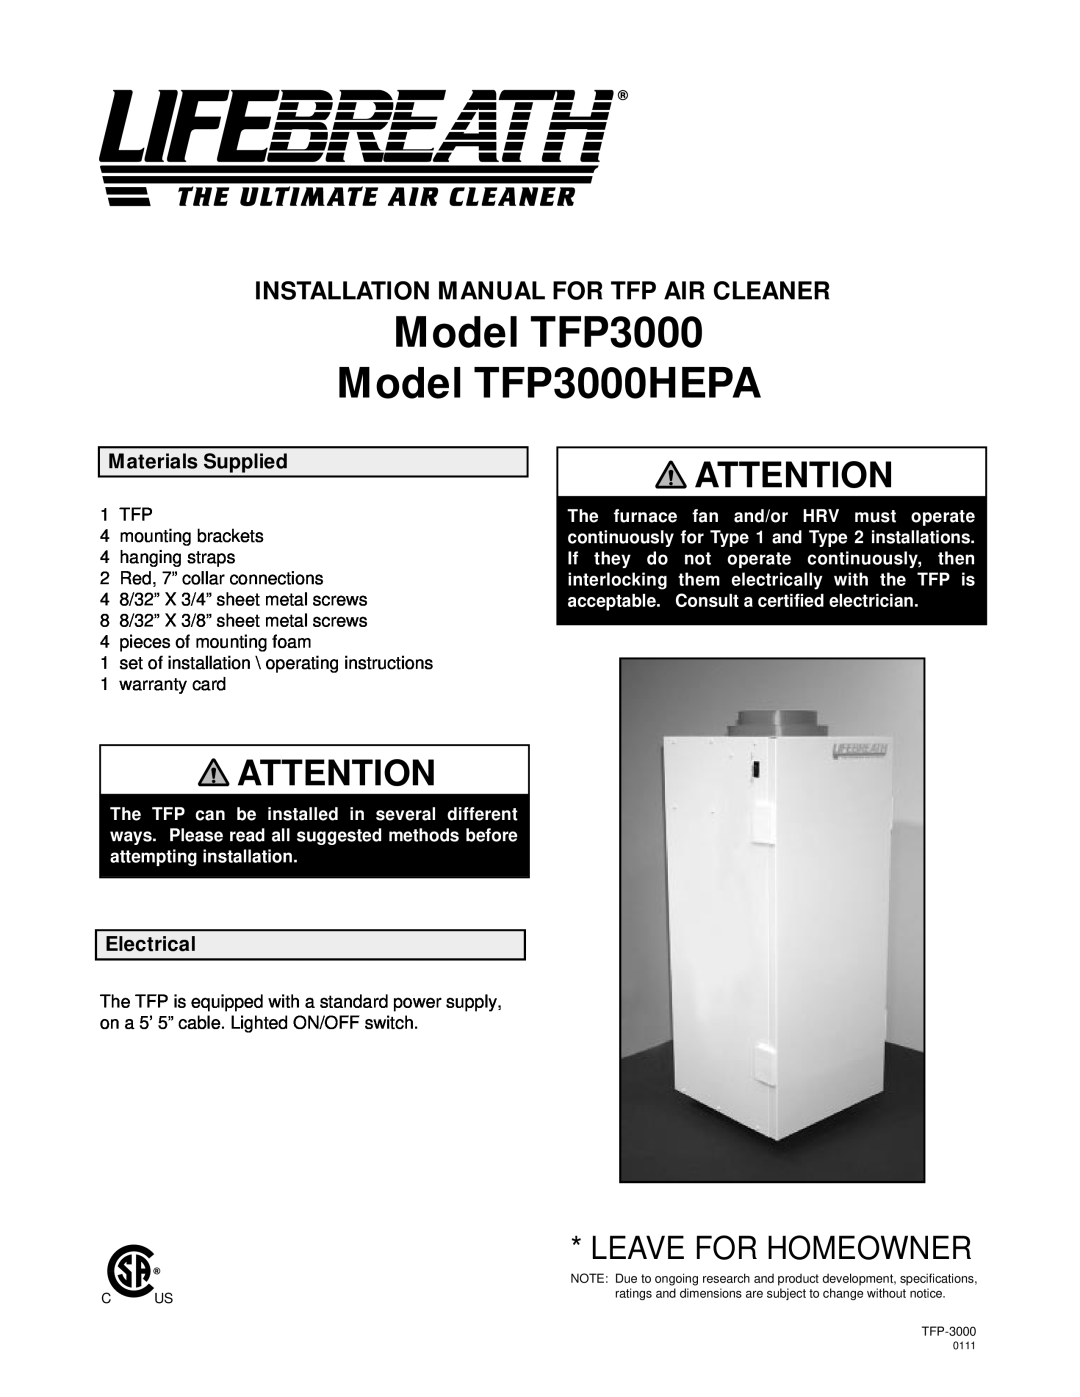 Lifebreath installation manual Materials Supplied, Electrical, Model TFP3000 Model TFP3000HEPA, Leave For Homeowner 